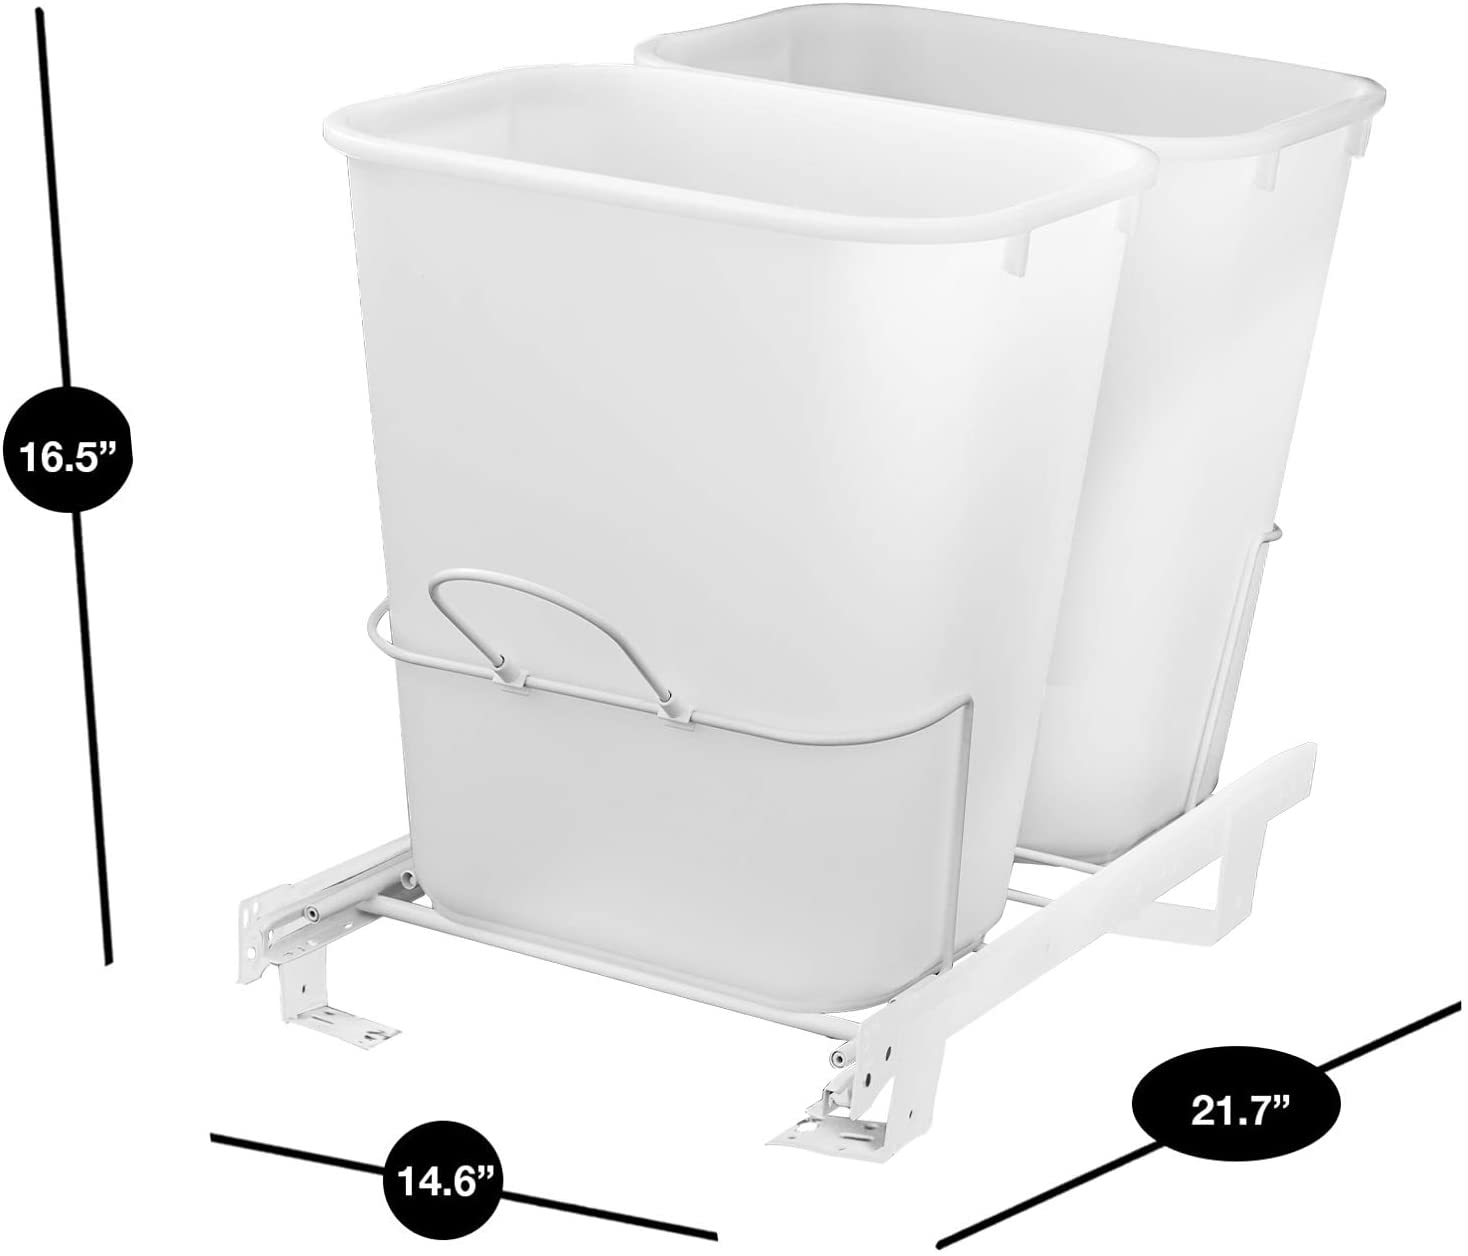 Smart Design 2.5 Gallon Collapsible Trash Can, White, BPA Free Plastic,  Folds In, Pops Out, Holds Grocery Bags, Camping Trash Solution